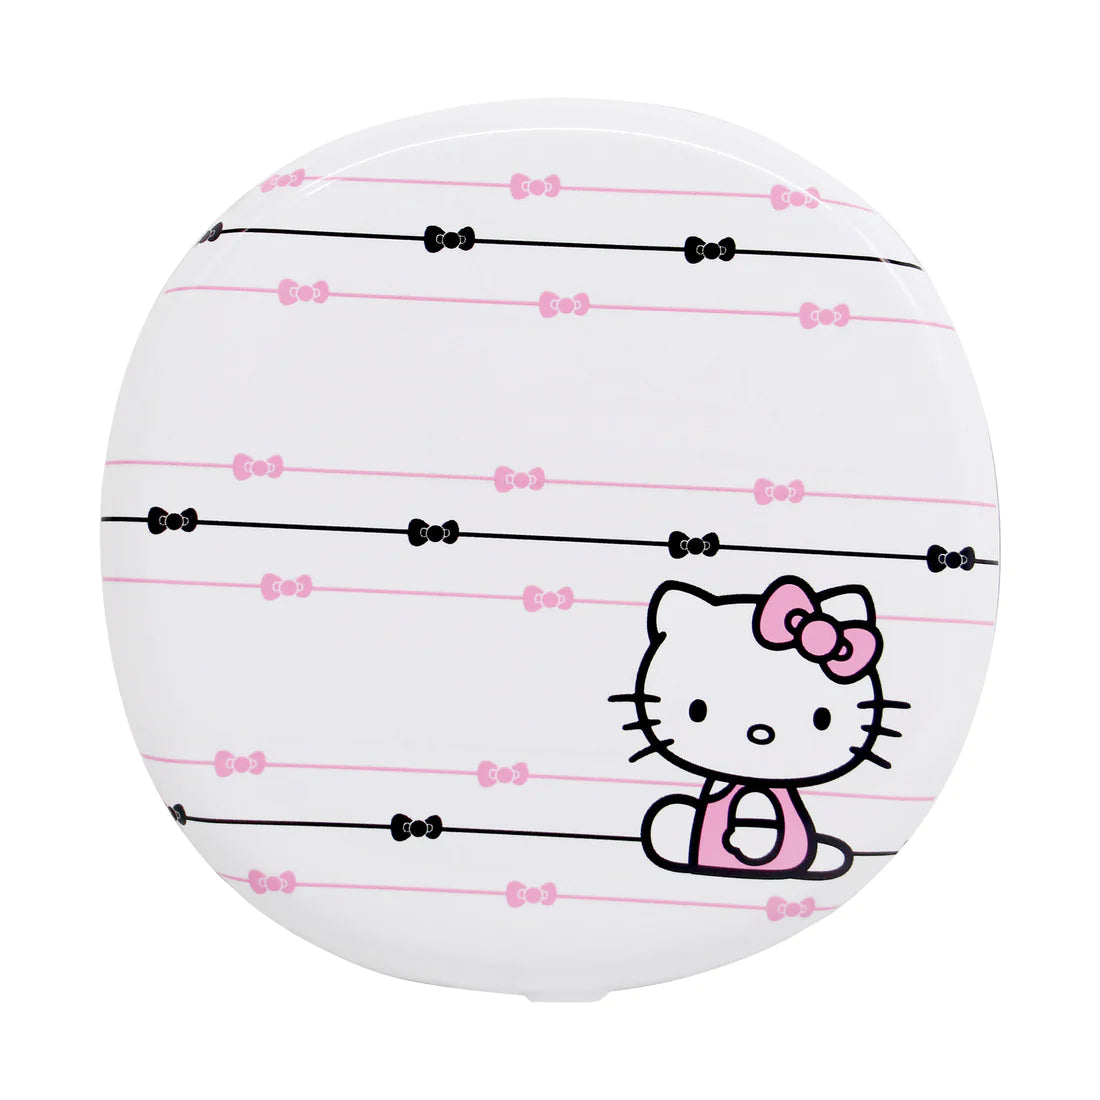 Impressions Vanity - Hello Kitty The Stripe LED Compact Mirror